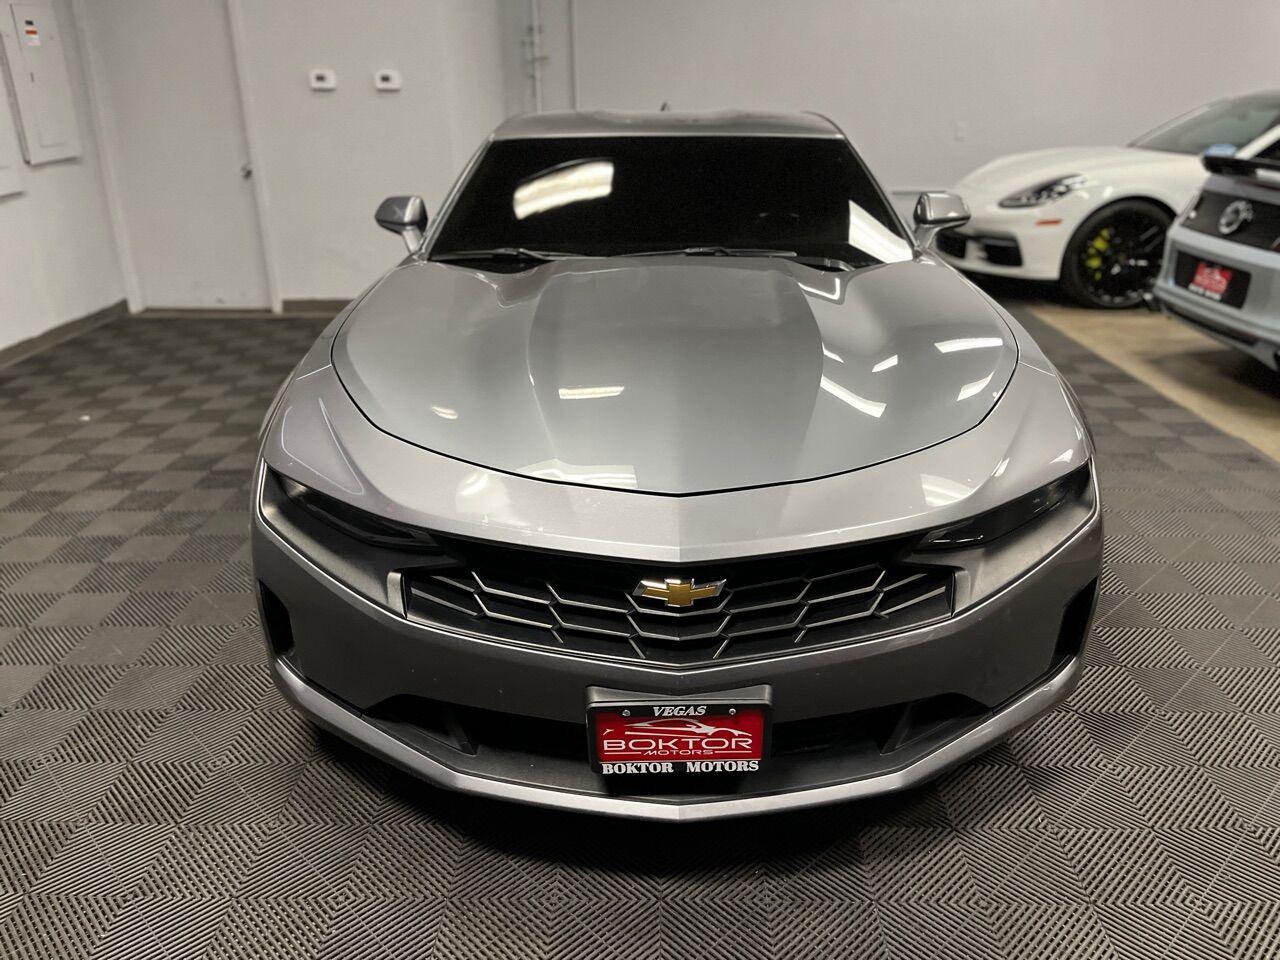 Used 2020 Chevrolet Camaro LT 2dr Coupe w/1LT For Sale (Sold 